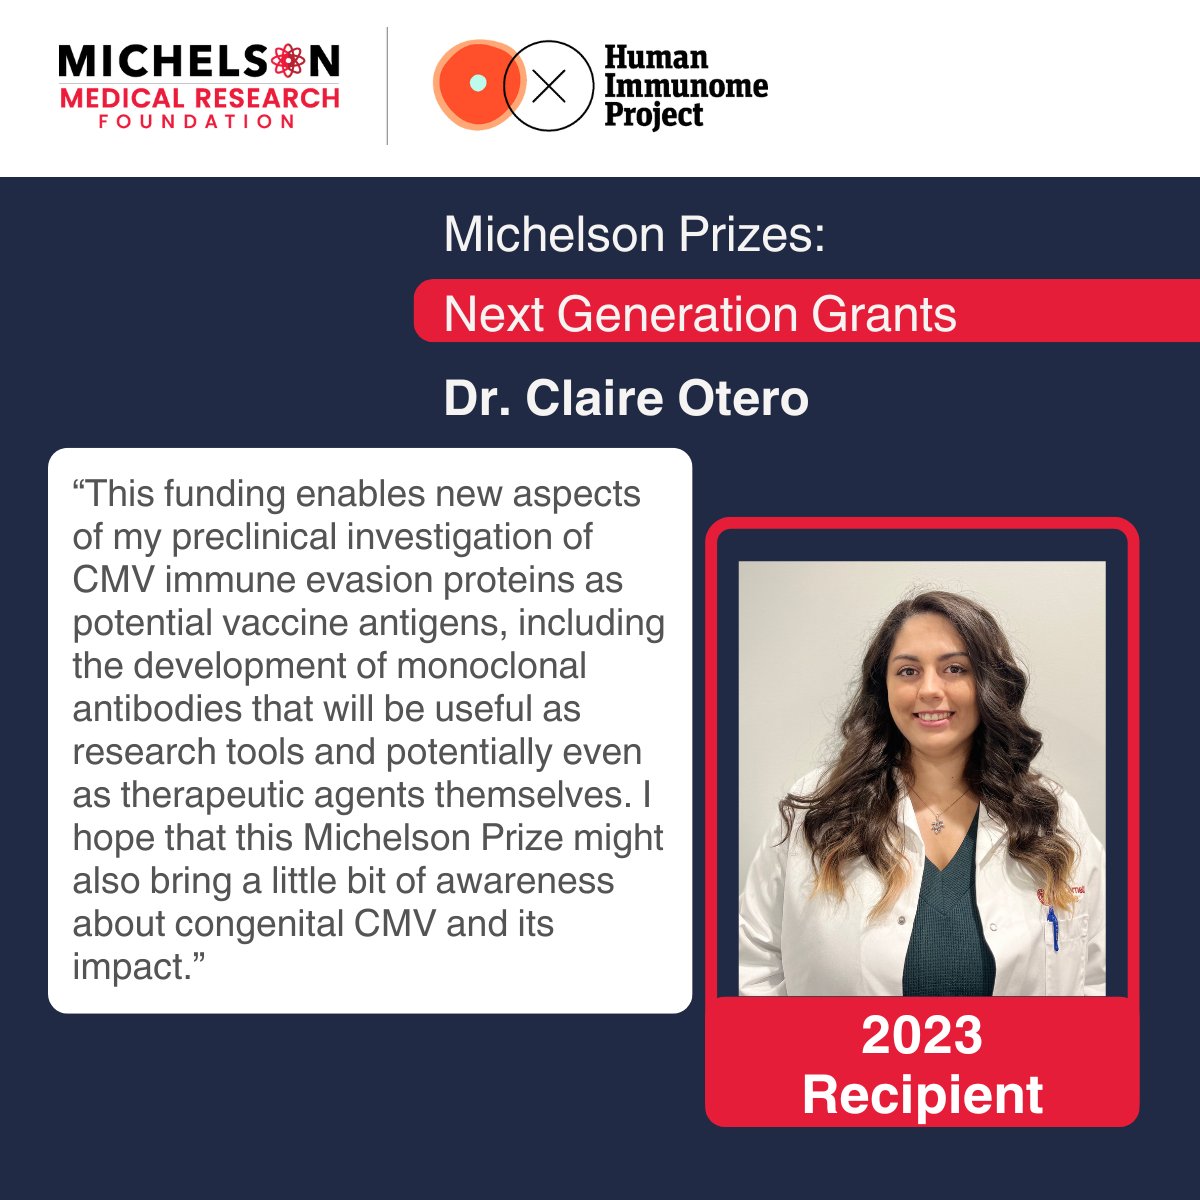 The #MichelsonPrizes offer early-career scientists funding to drive innovative research on immunology, vaccine discovery, and immunotherapies. 2023 awardee @ClaireEOtero is using the grant to advance her work combatting CMV. Submit your proposal today! michelsonprizes.smapply.org